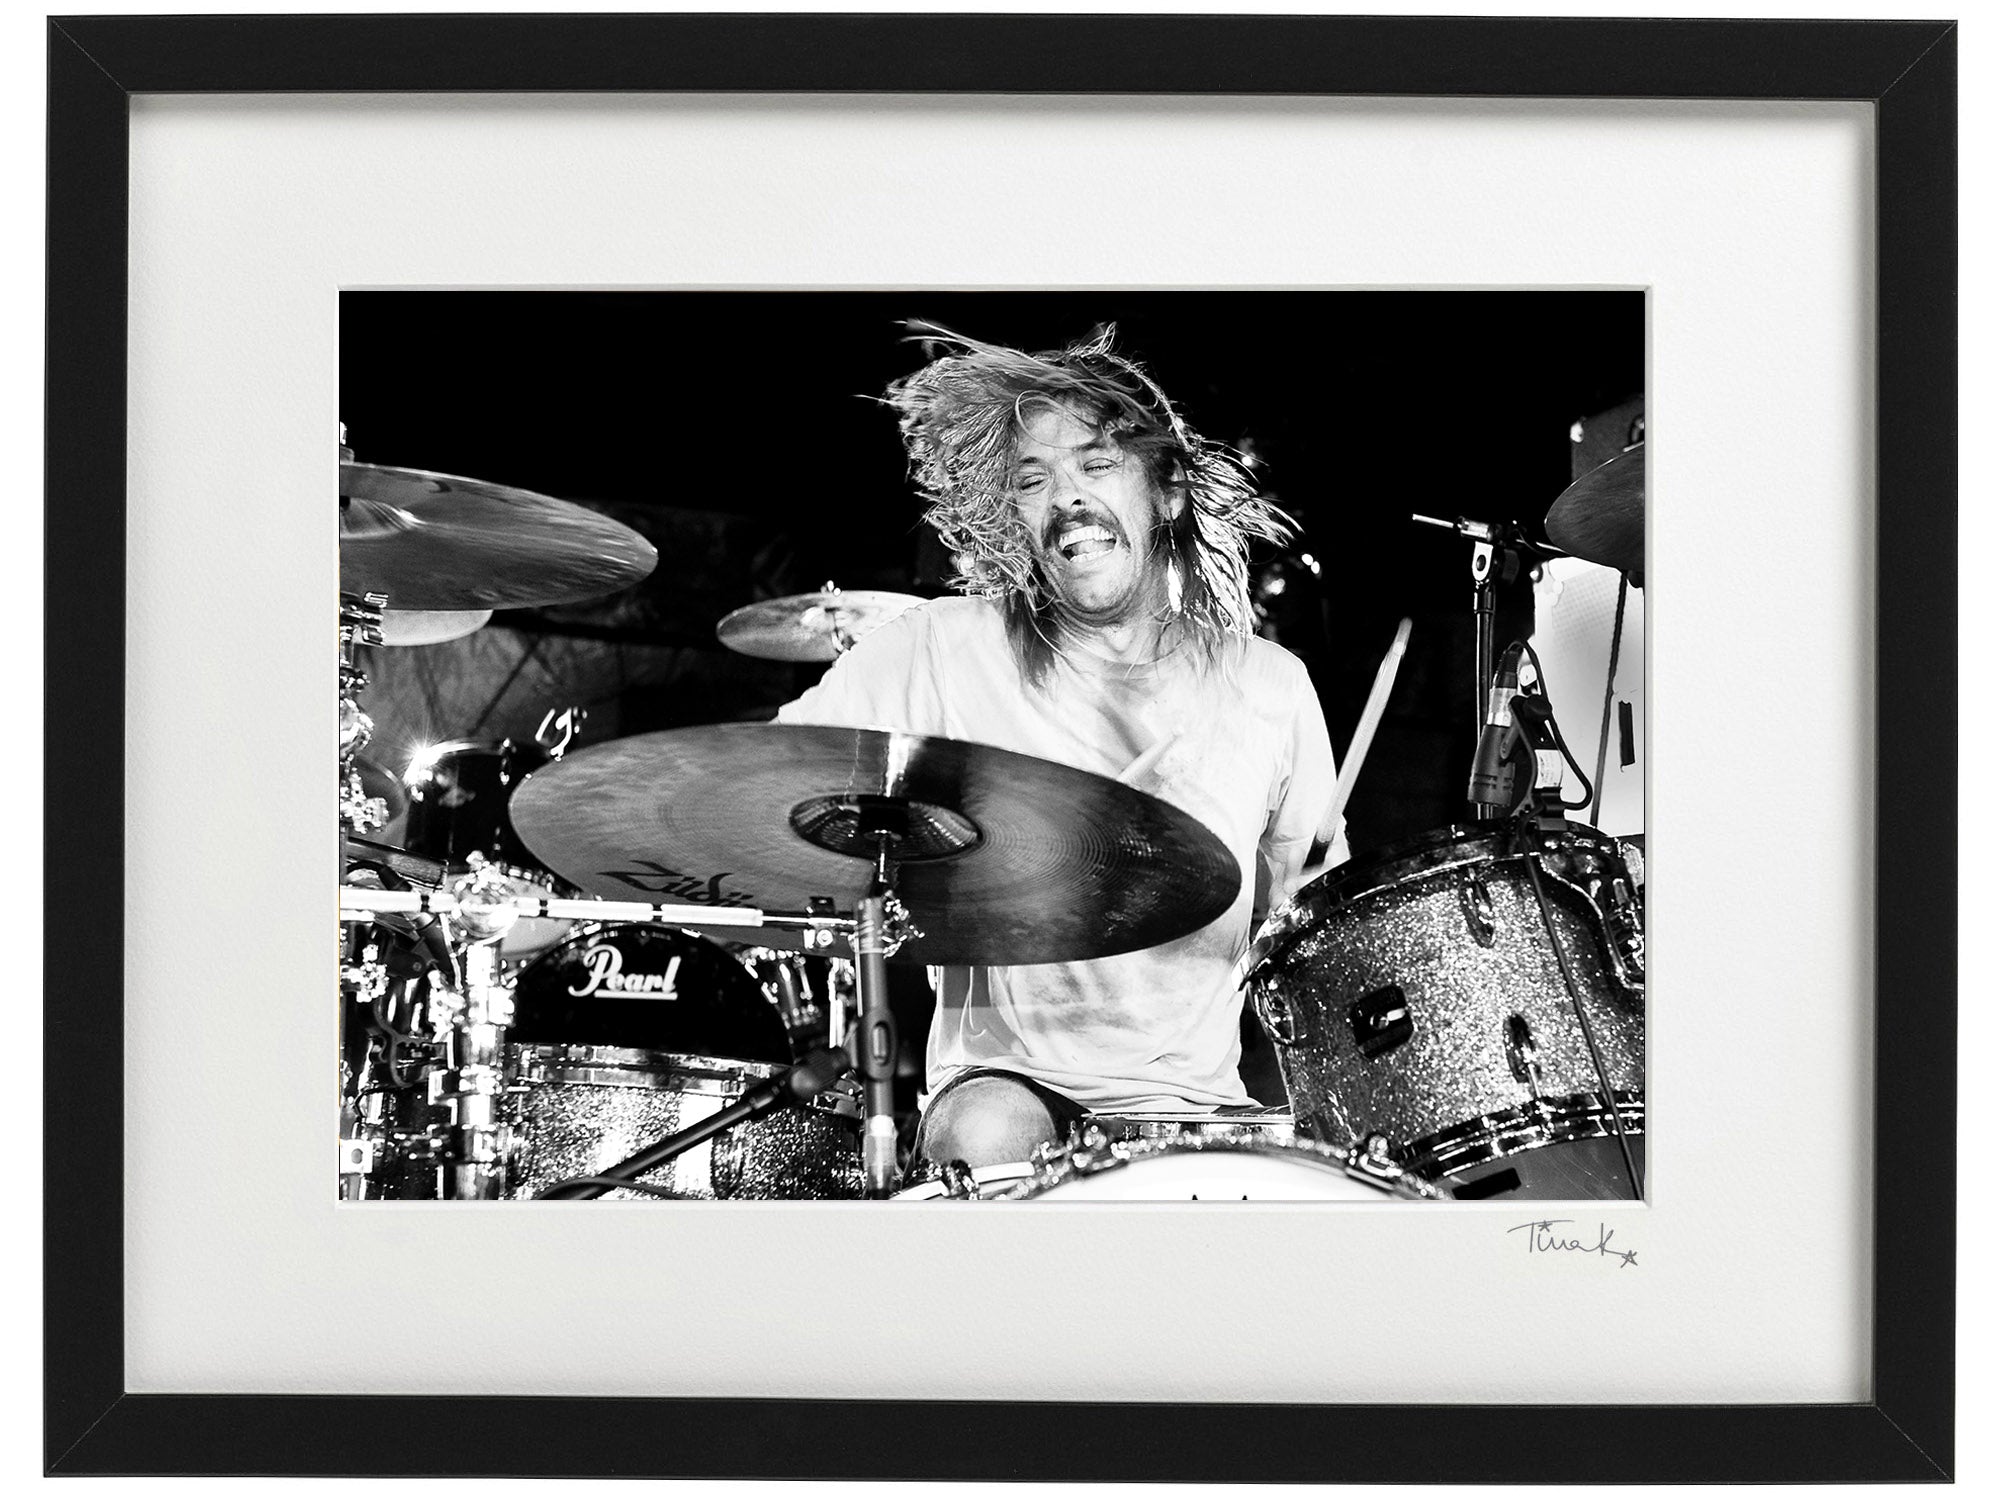 Taylor Hawkins playing drums onstage at Download festival 2010 with Taylor Hawkins And The Coattail Riders. Black and white framed print by Tina K Photography